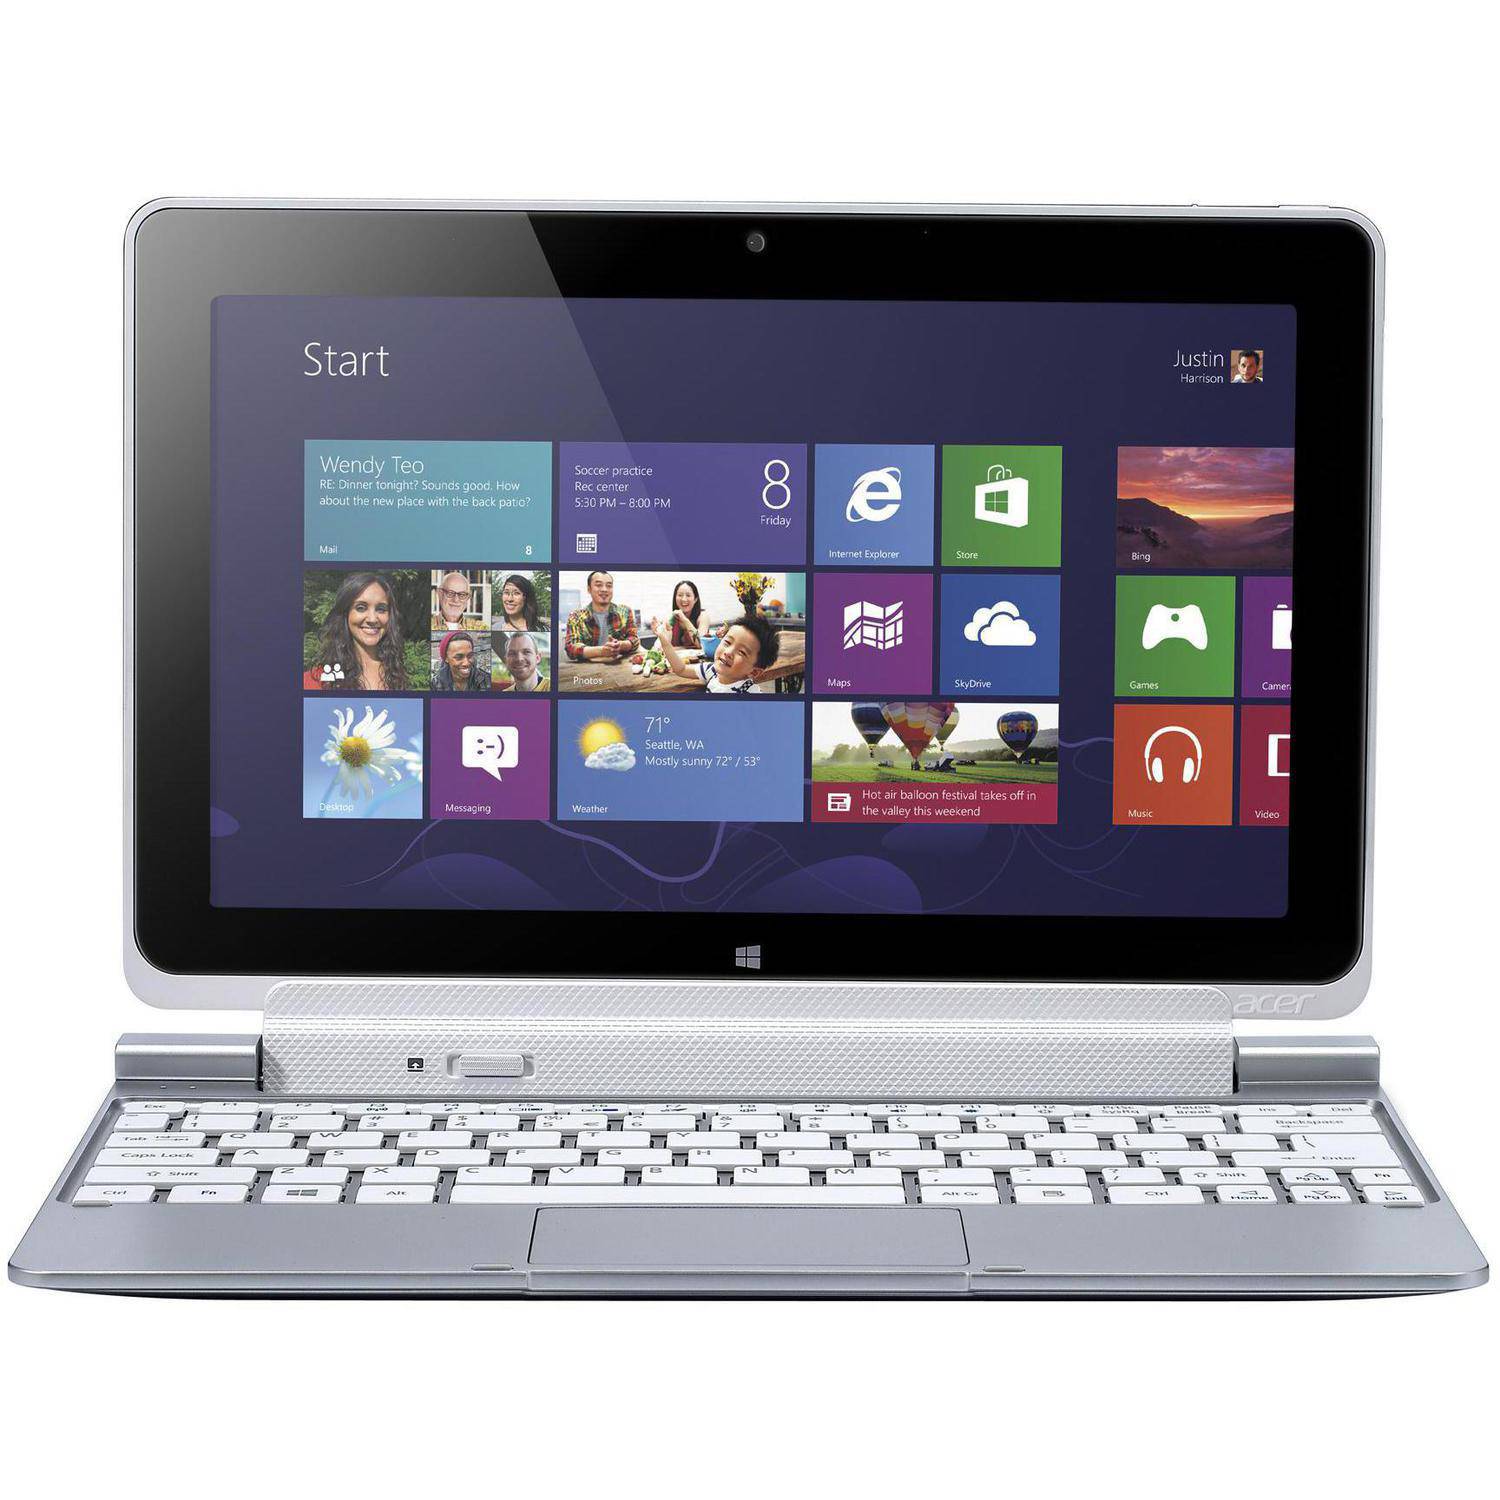 Acer White 10.1" ICONIA W510-1849 2-in-1 Convertible PC with Intel Atom Dual-Core Z2760 Processor, 2GB Memory, 32GB Hard Drive and Windows 8 - image 2 of 9